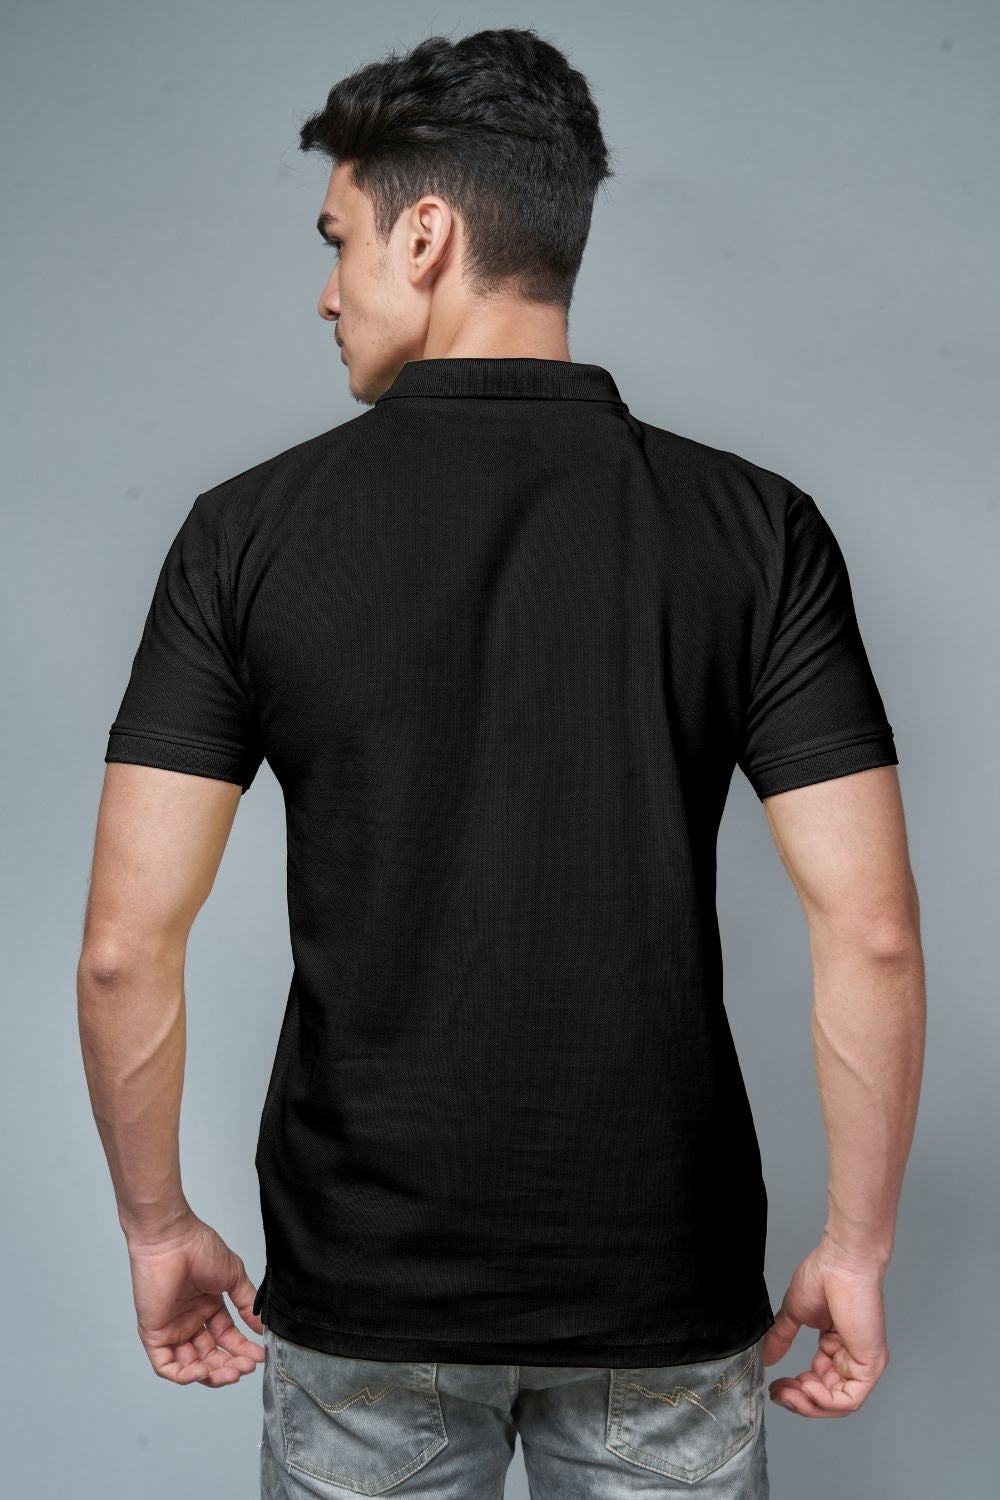 Black colored, identity Polo T-shirts for men with collar and half sleeves, back view.